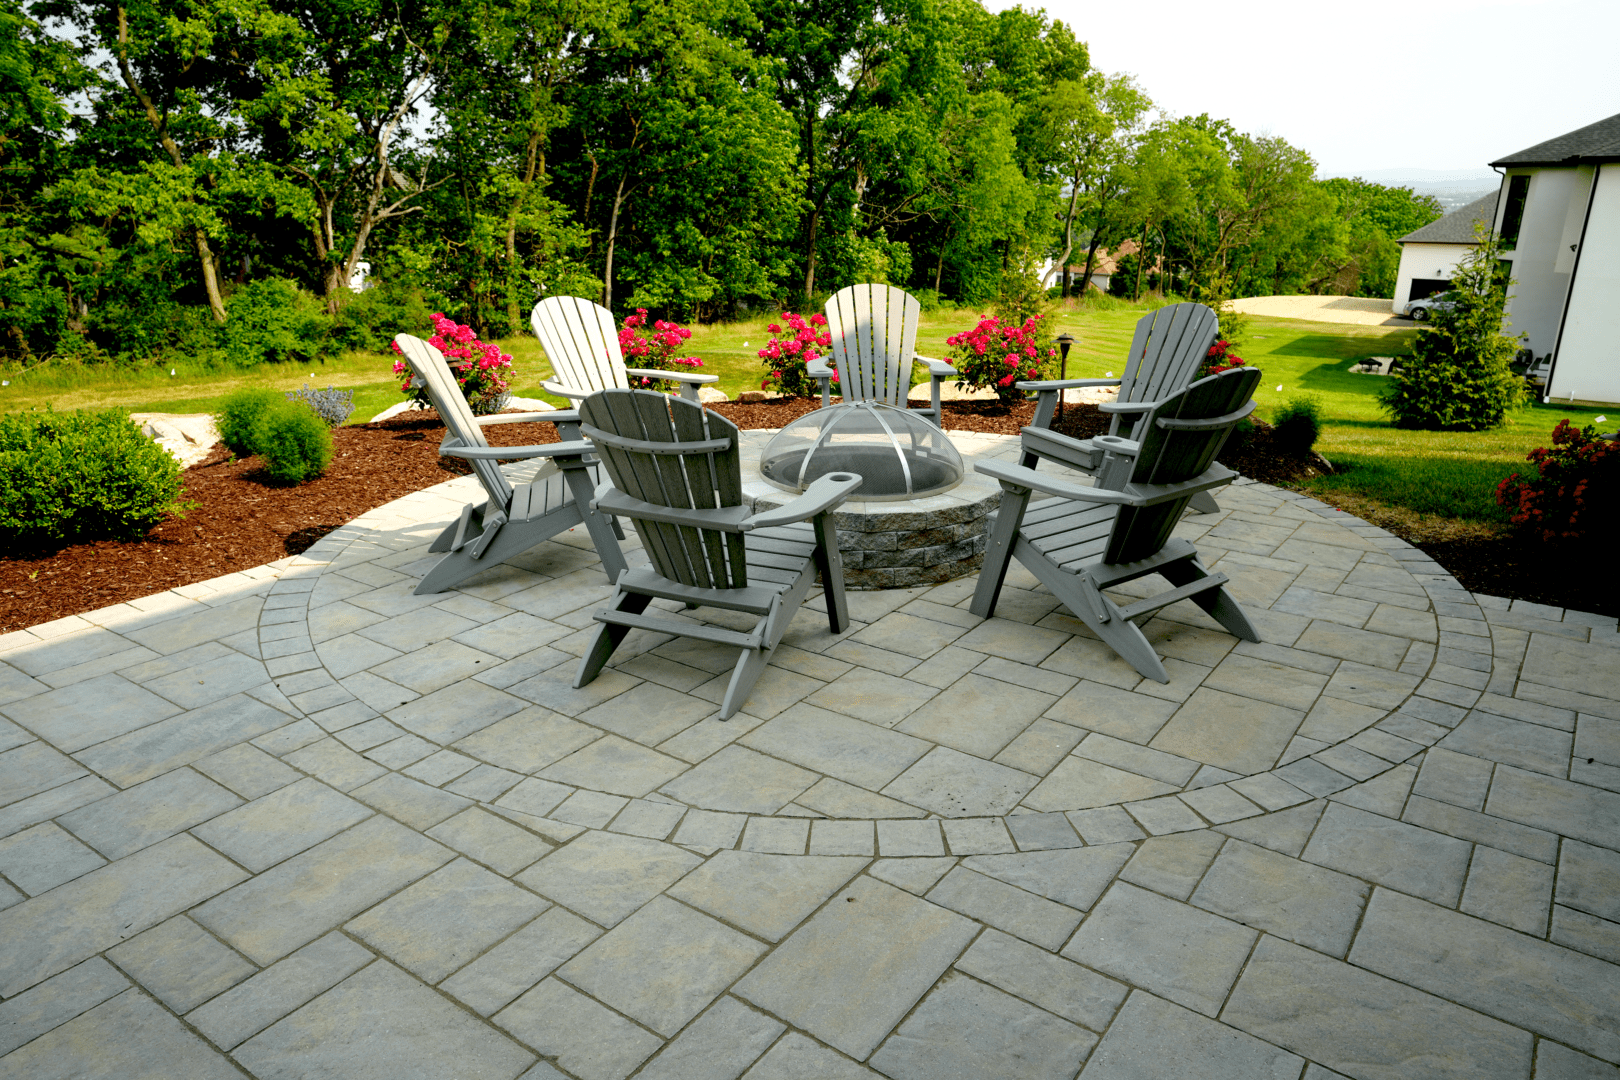 A patio with chairs and a fire pit, perfect for Planting Professionals to unwind after a long day.